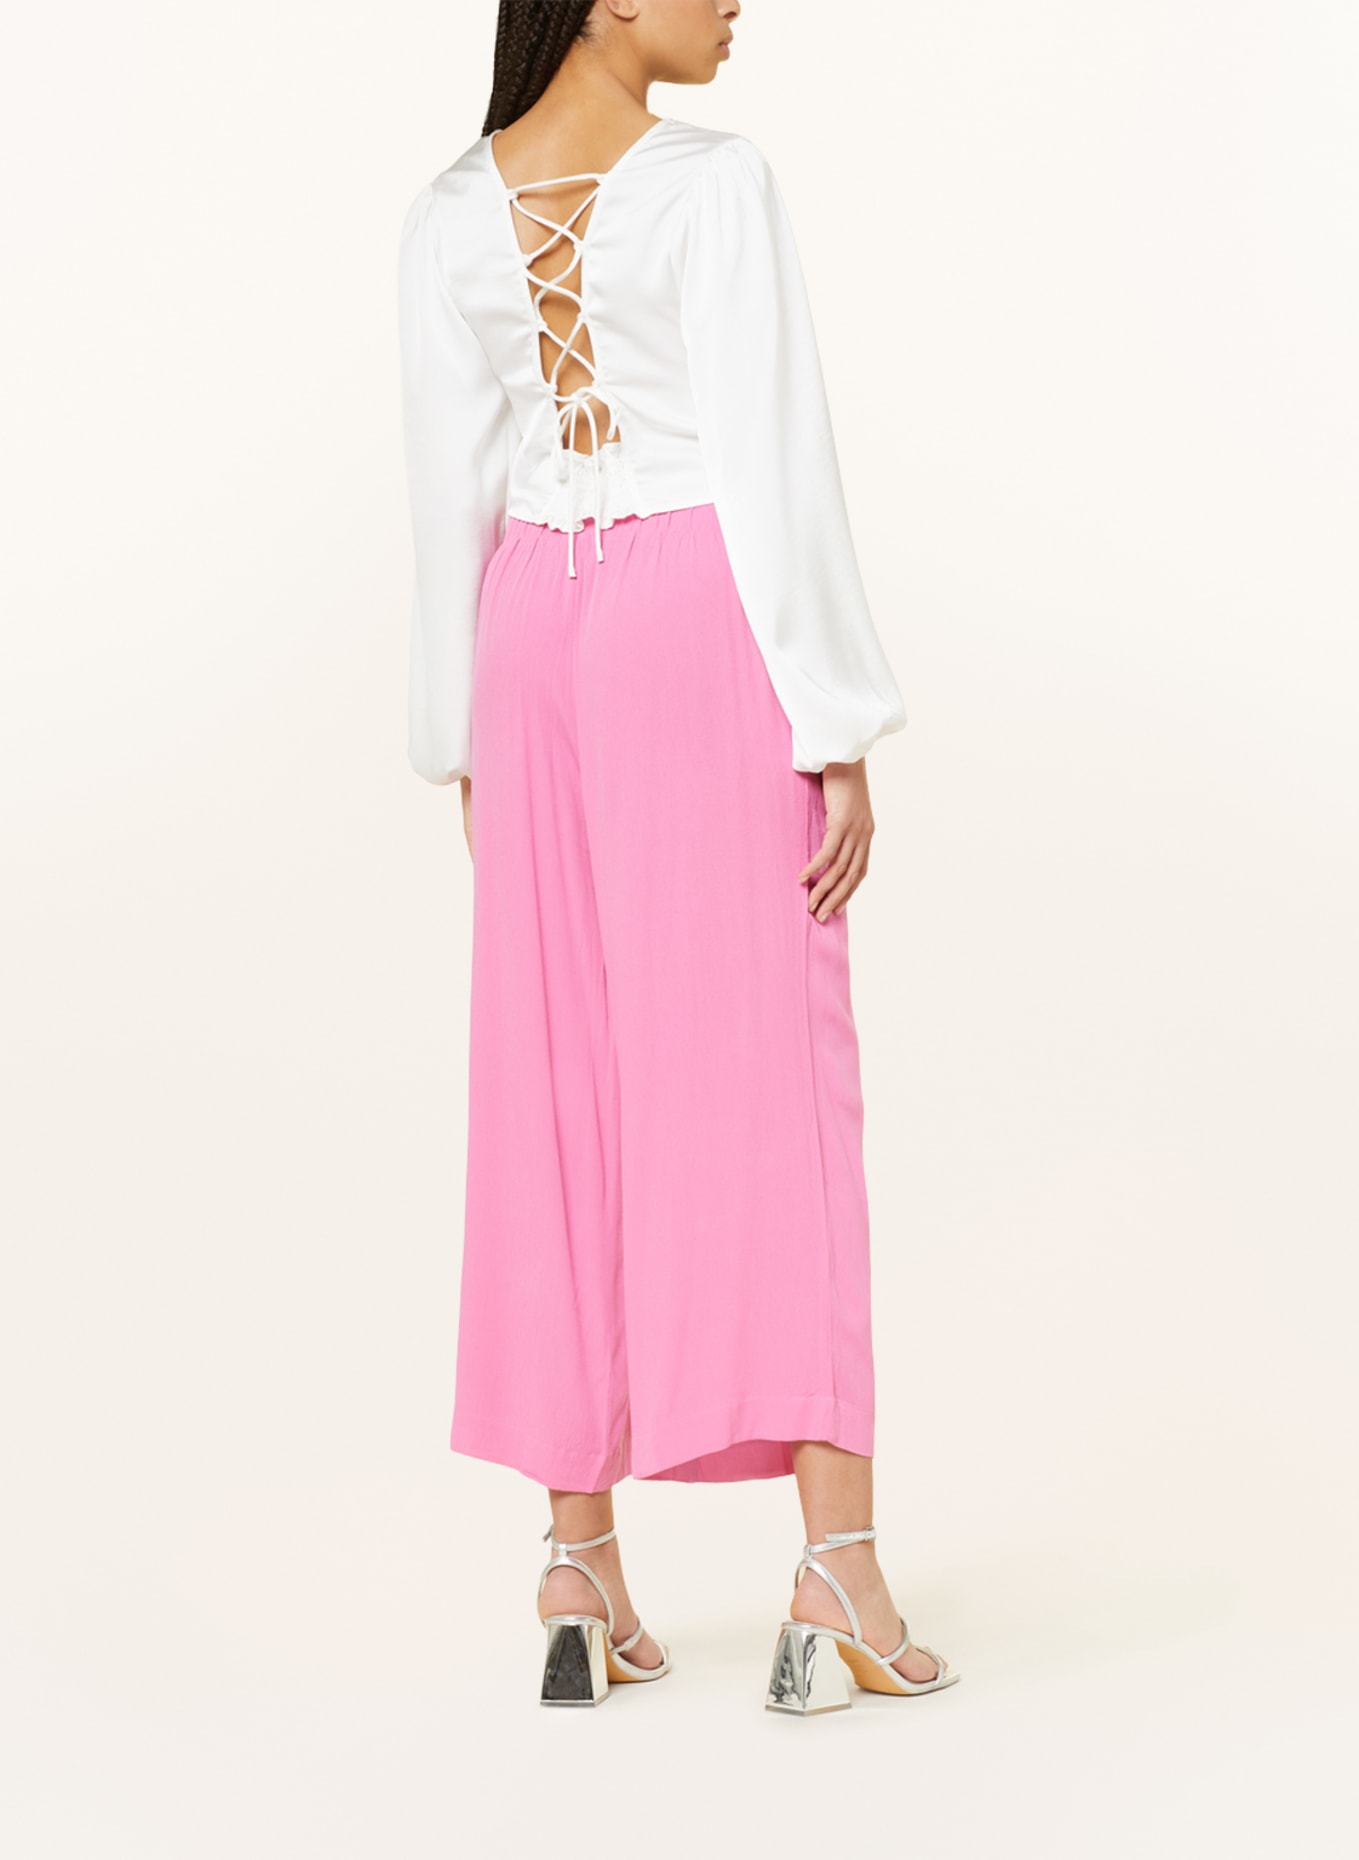 ICHI Culottes IHMARRAKECH, Color: PINK (Image 3)